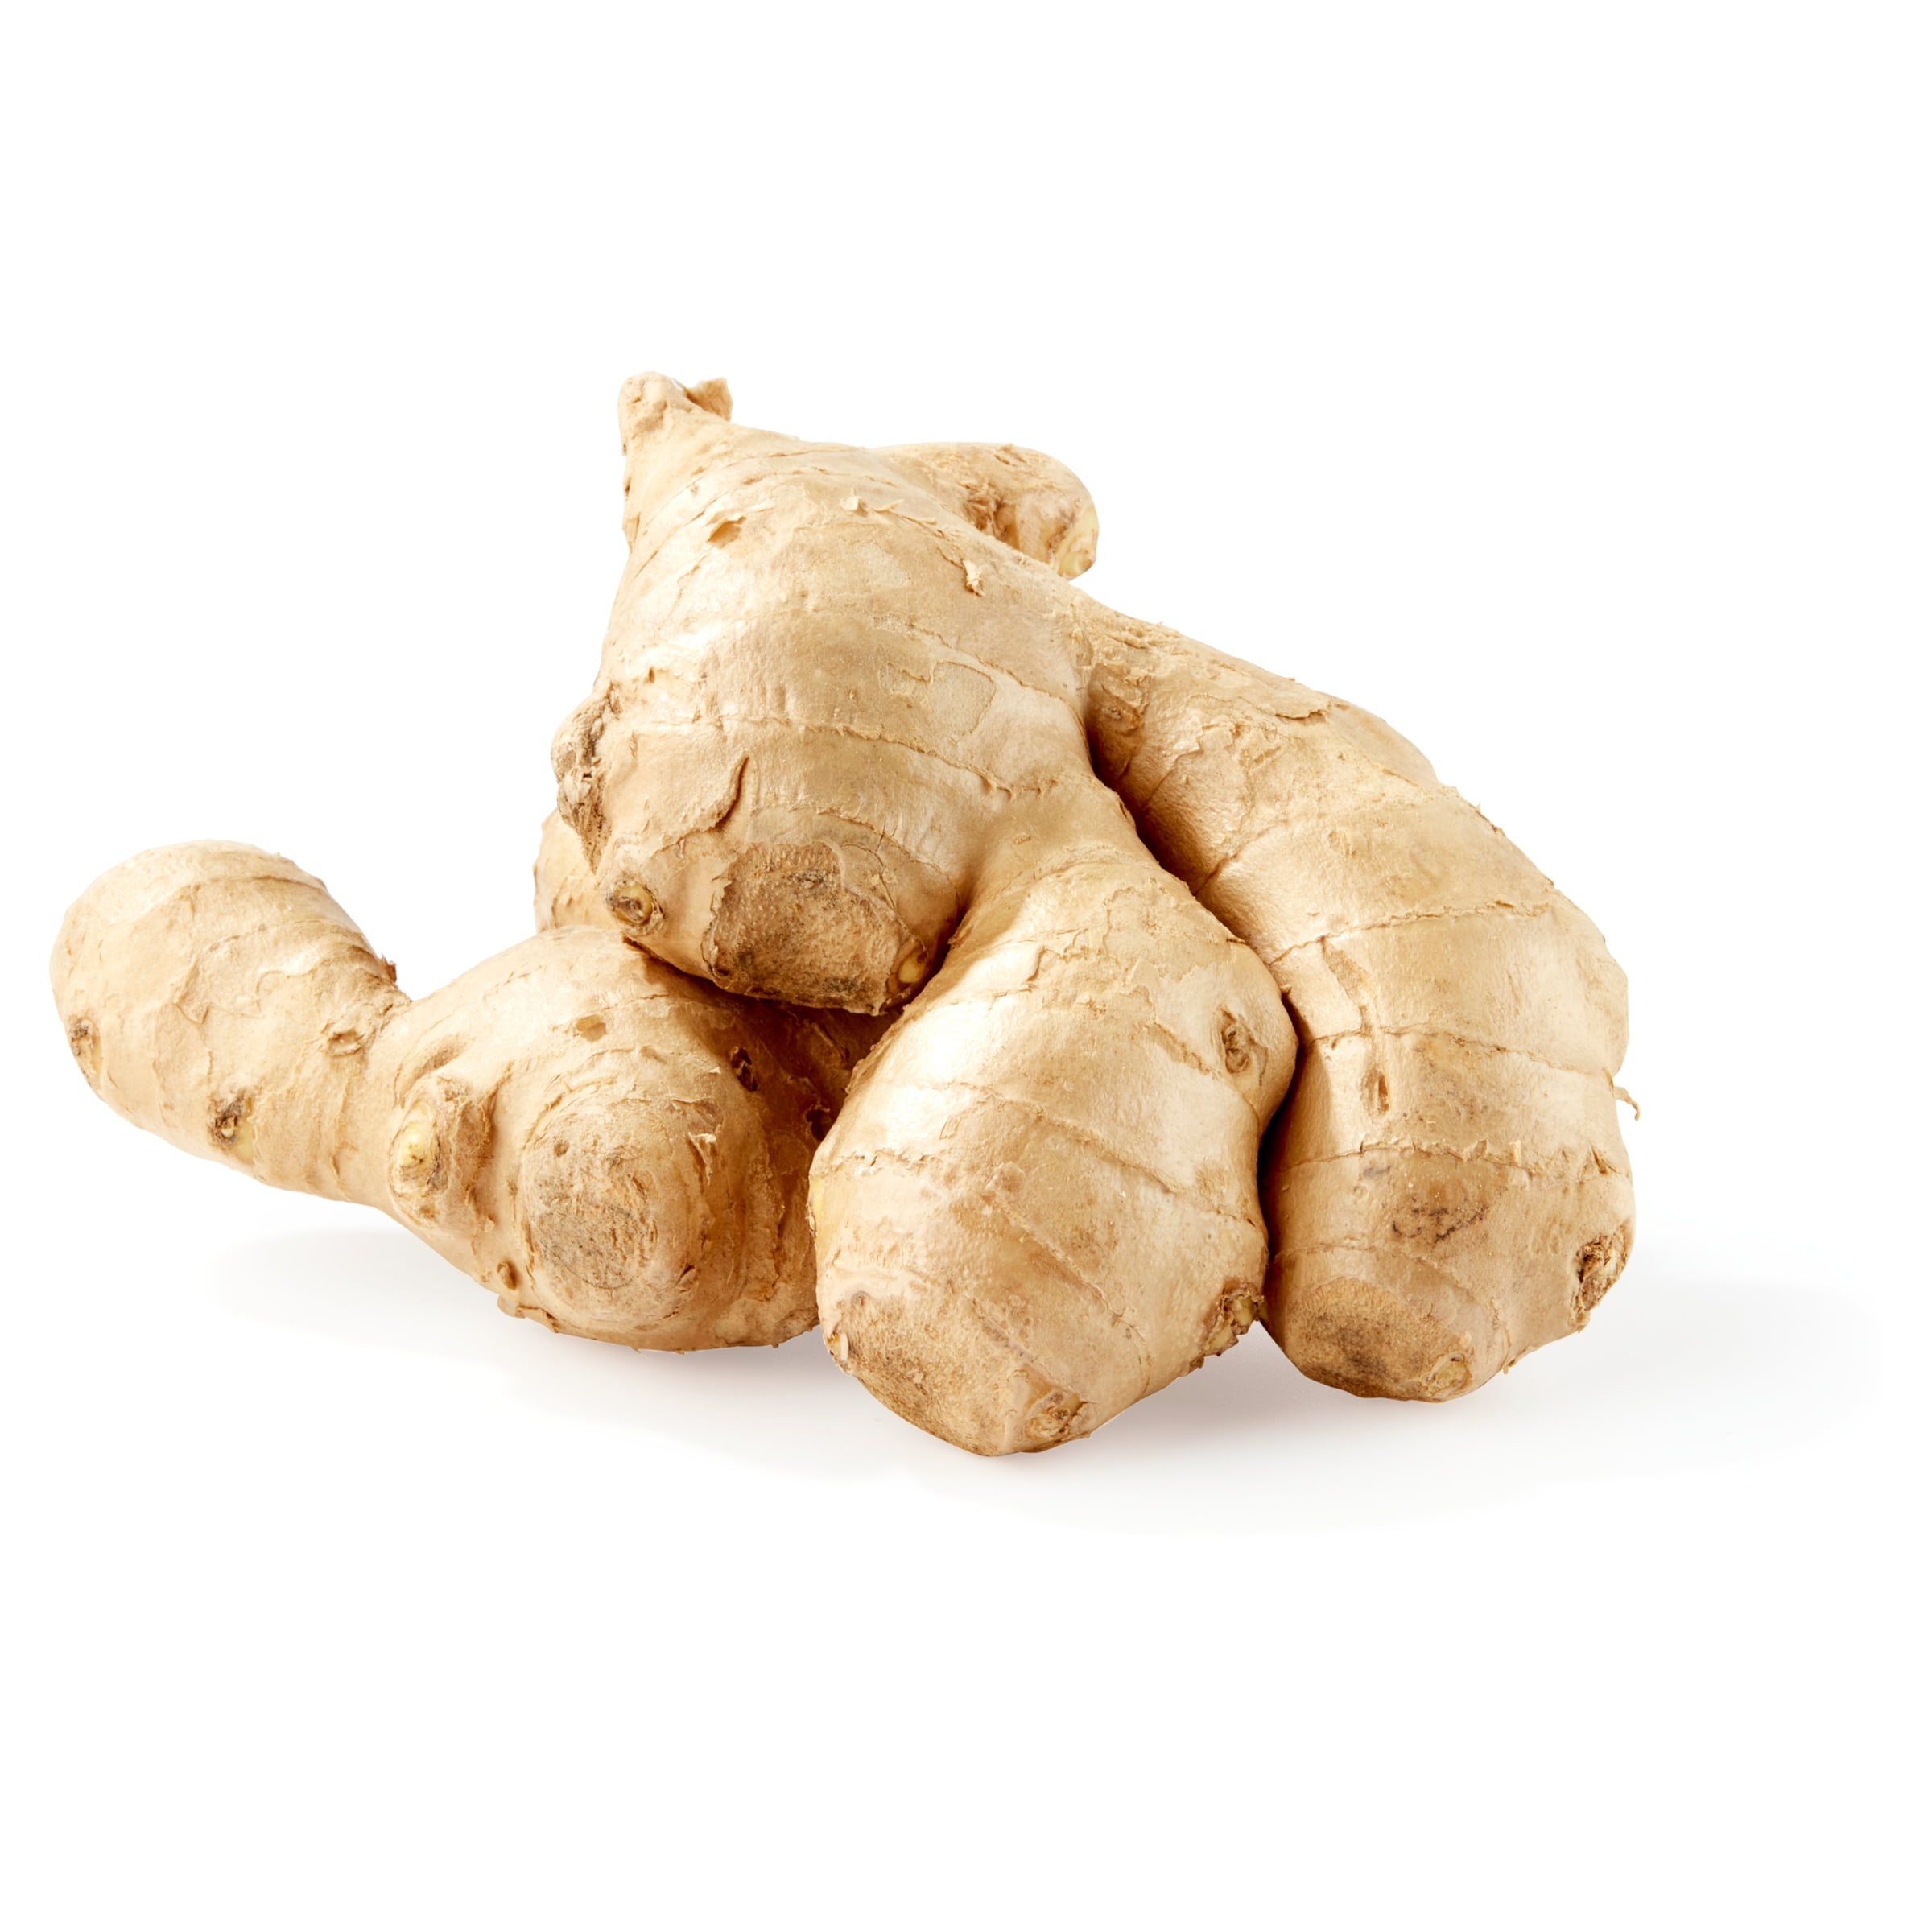 Does Ginger Have Real Benefits? 9 Science-Backed Takeaways - GoodRx